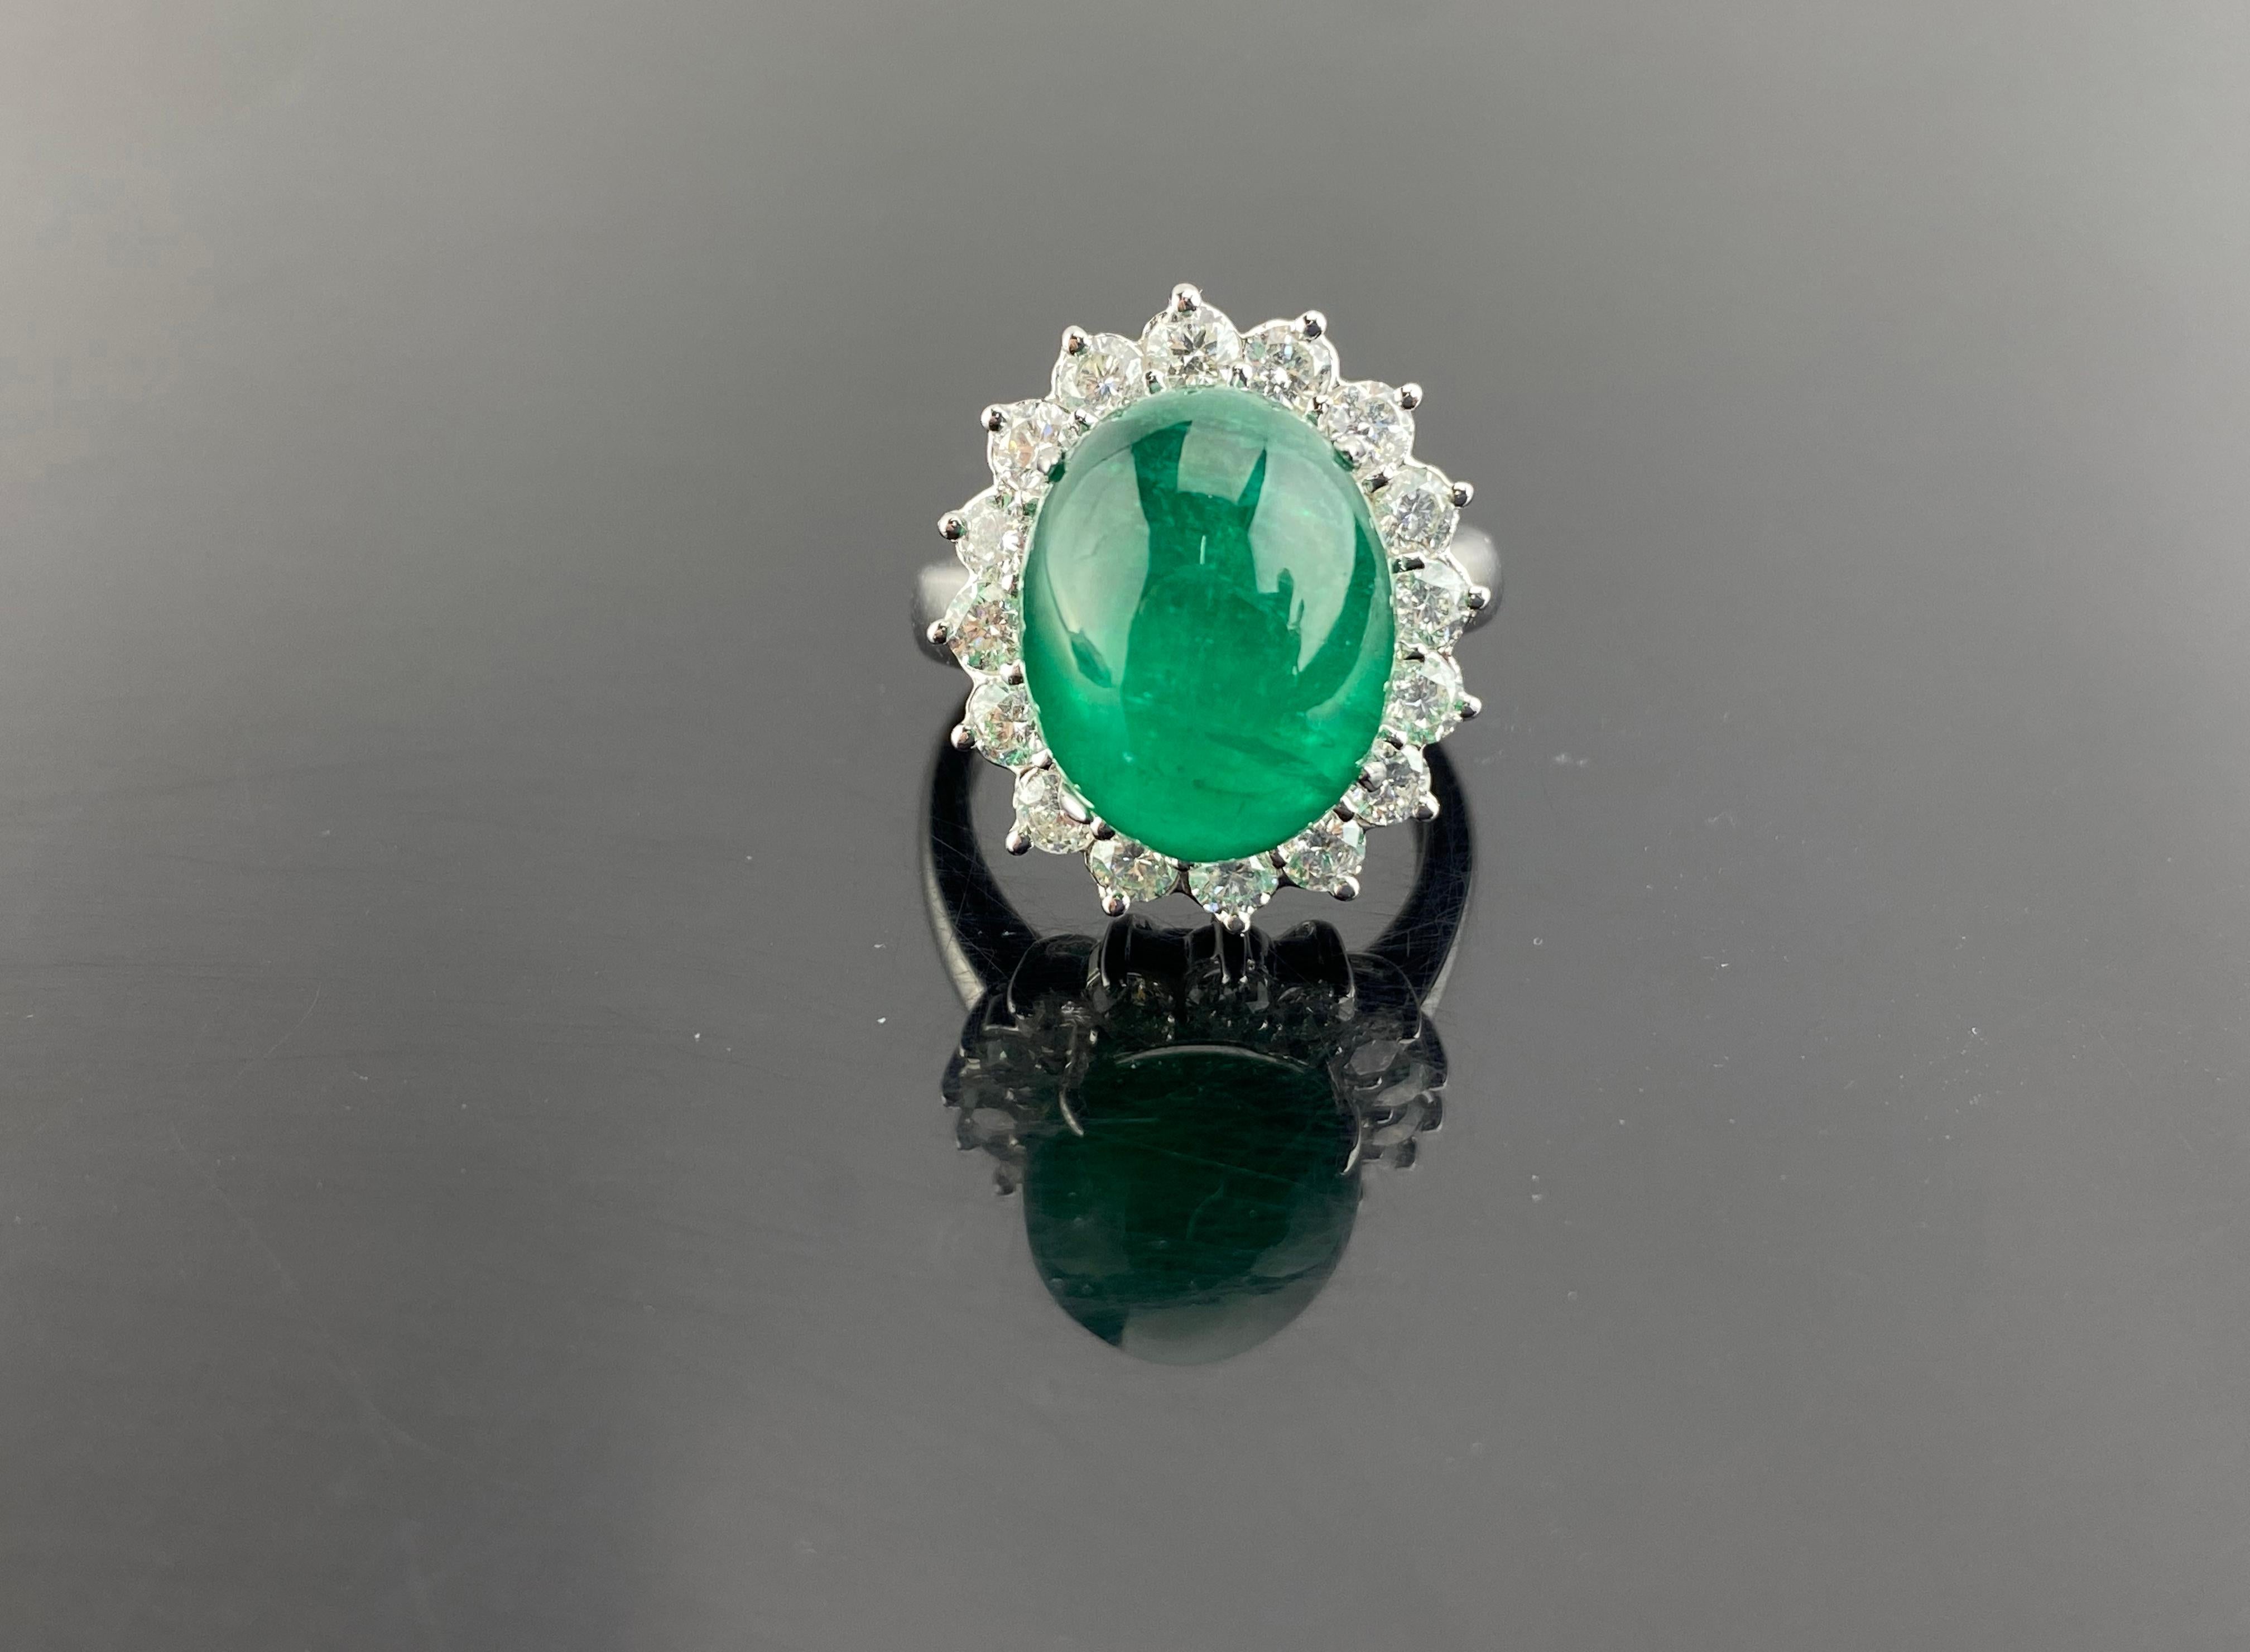 A beautiful, classic 16.60 carat Zambian Emerald cabochon center stone, with 1.04 carat VS quality White Diamonds around it, all set in 18K solid White Gold. The Emerald is transparent, lustrous and of an ideal vivid green color, making it a very